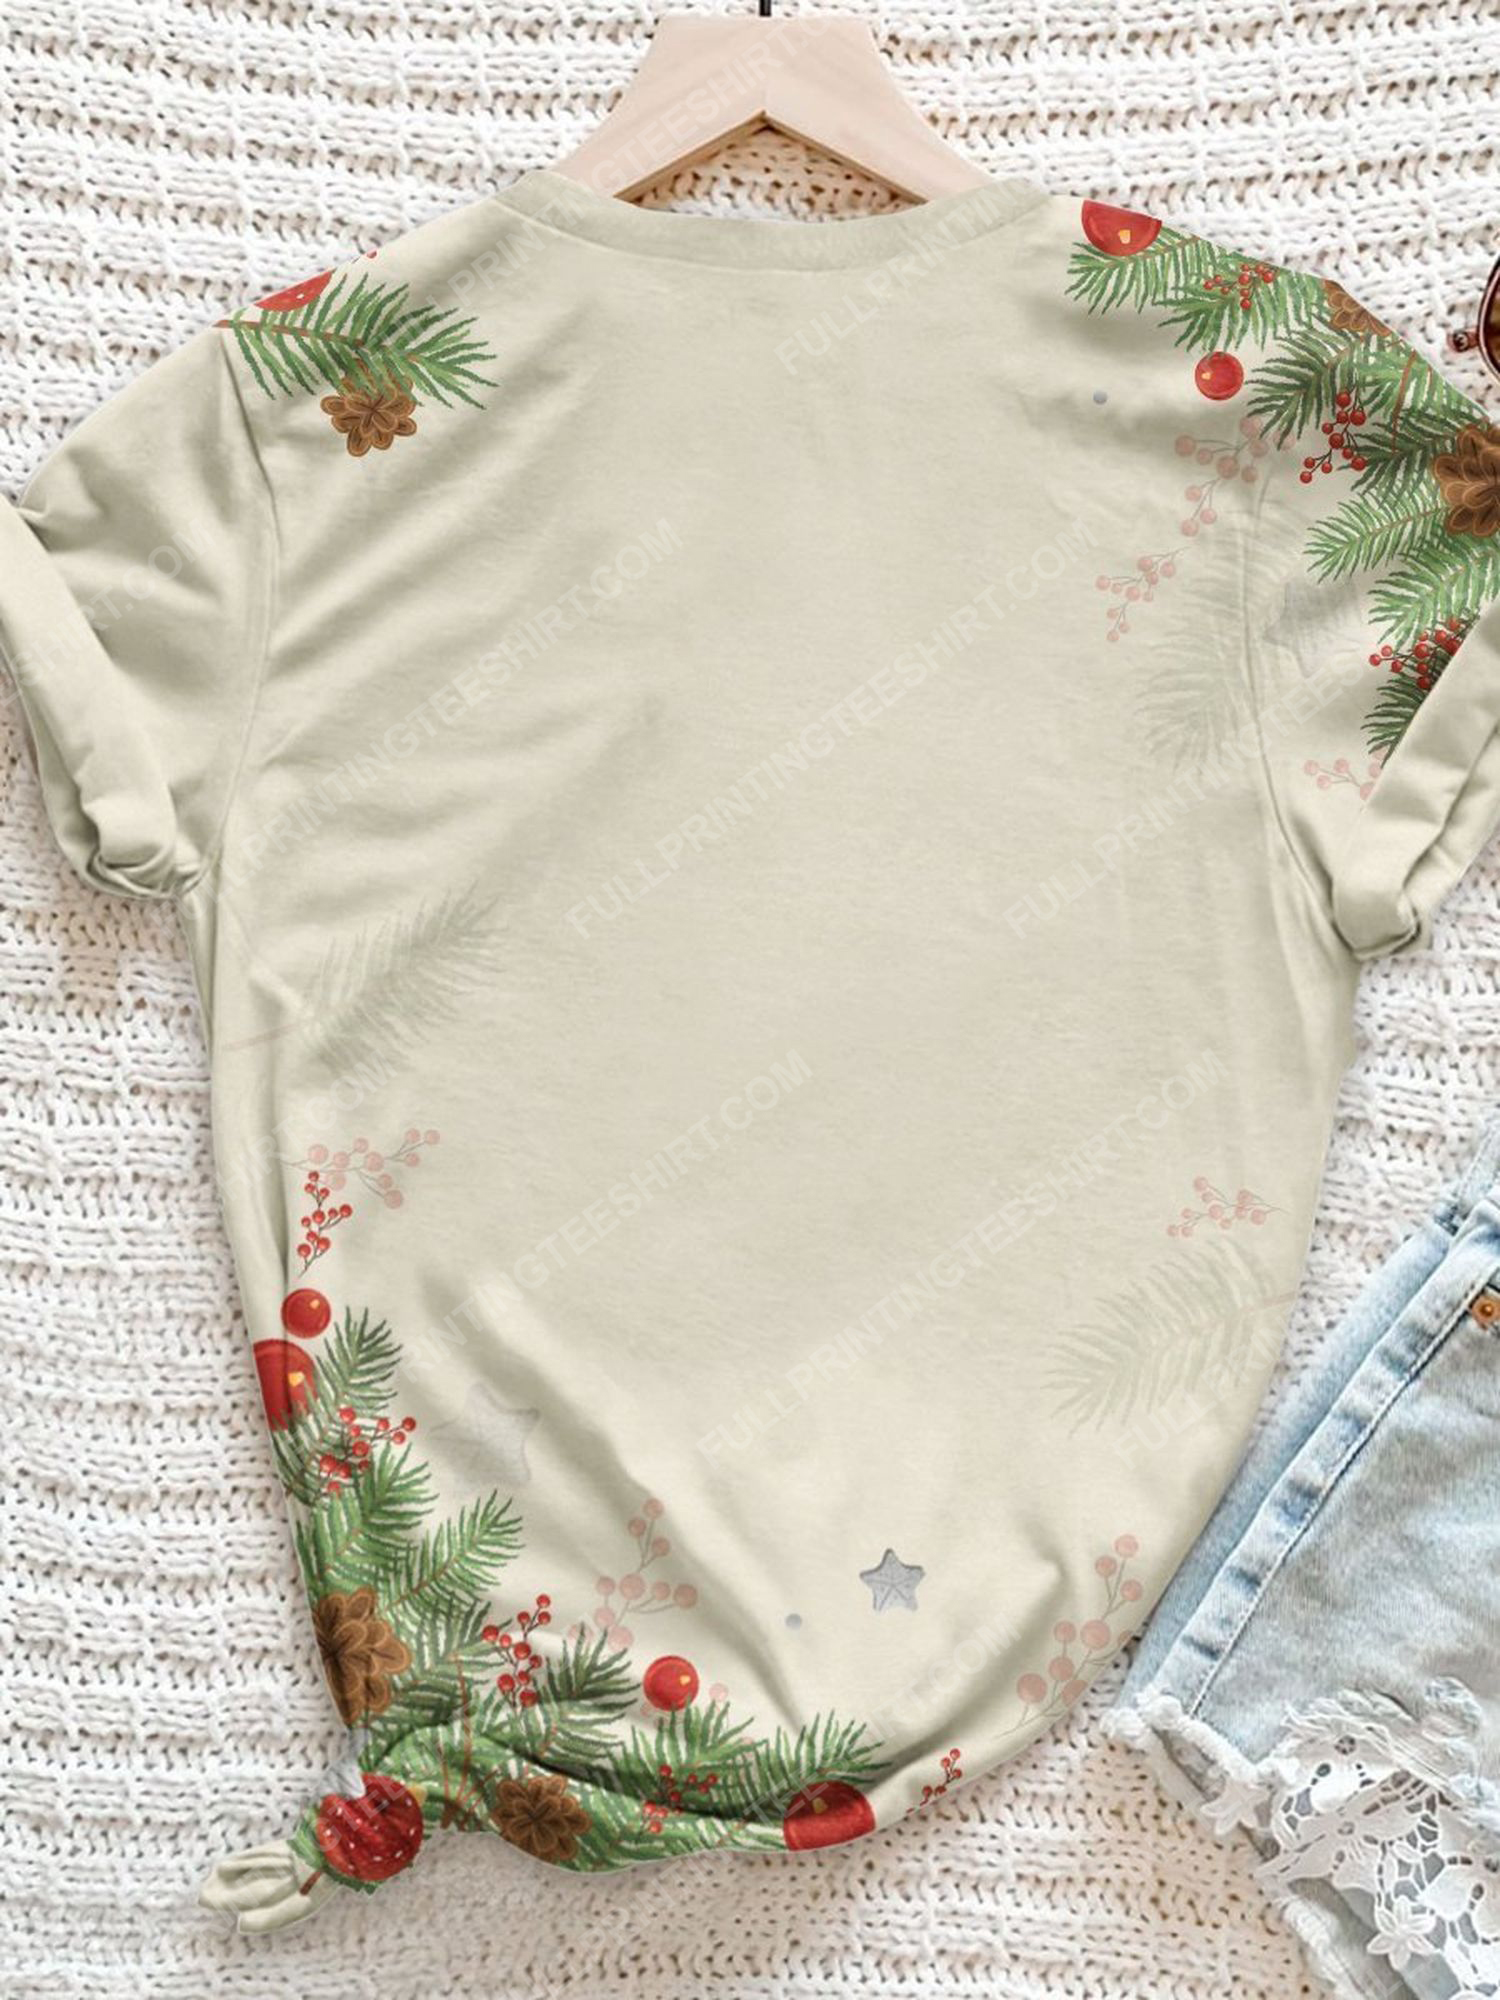 Happy holiday baby it's cold outside full print shirt